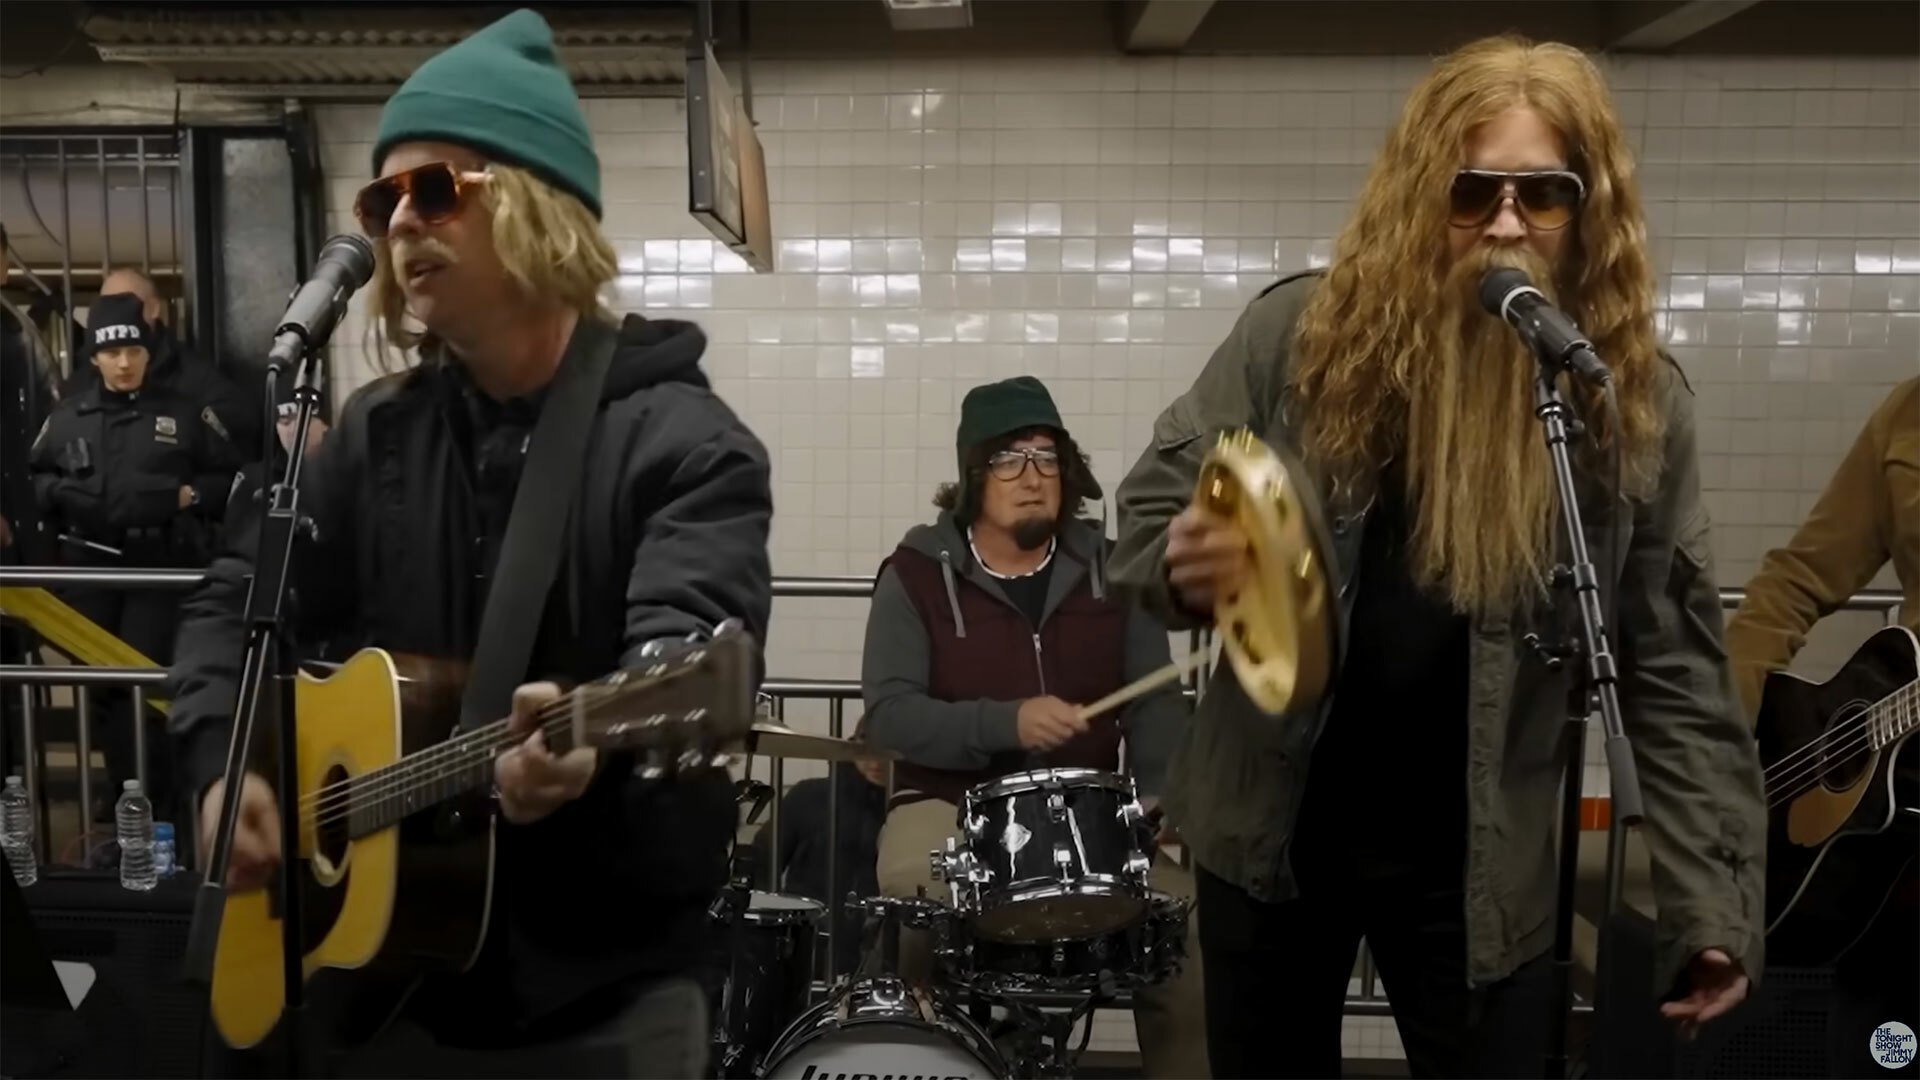 A group of buskers with beards and sunglasses play on the subway.